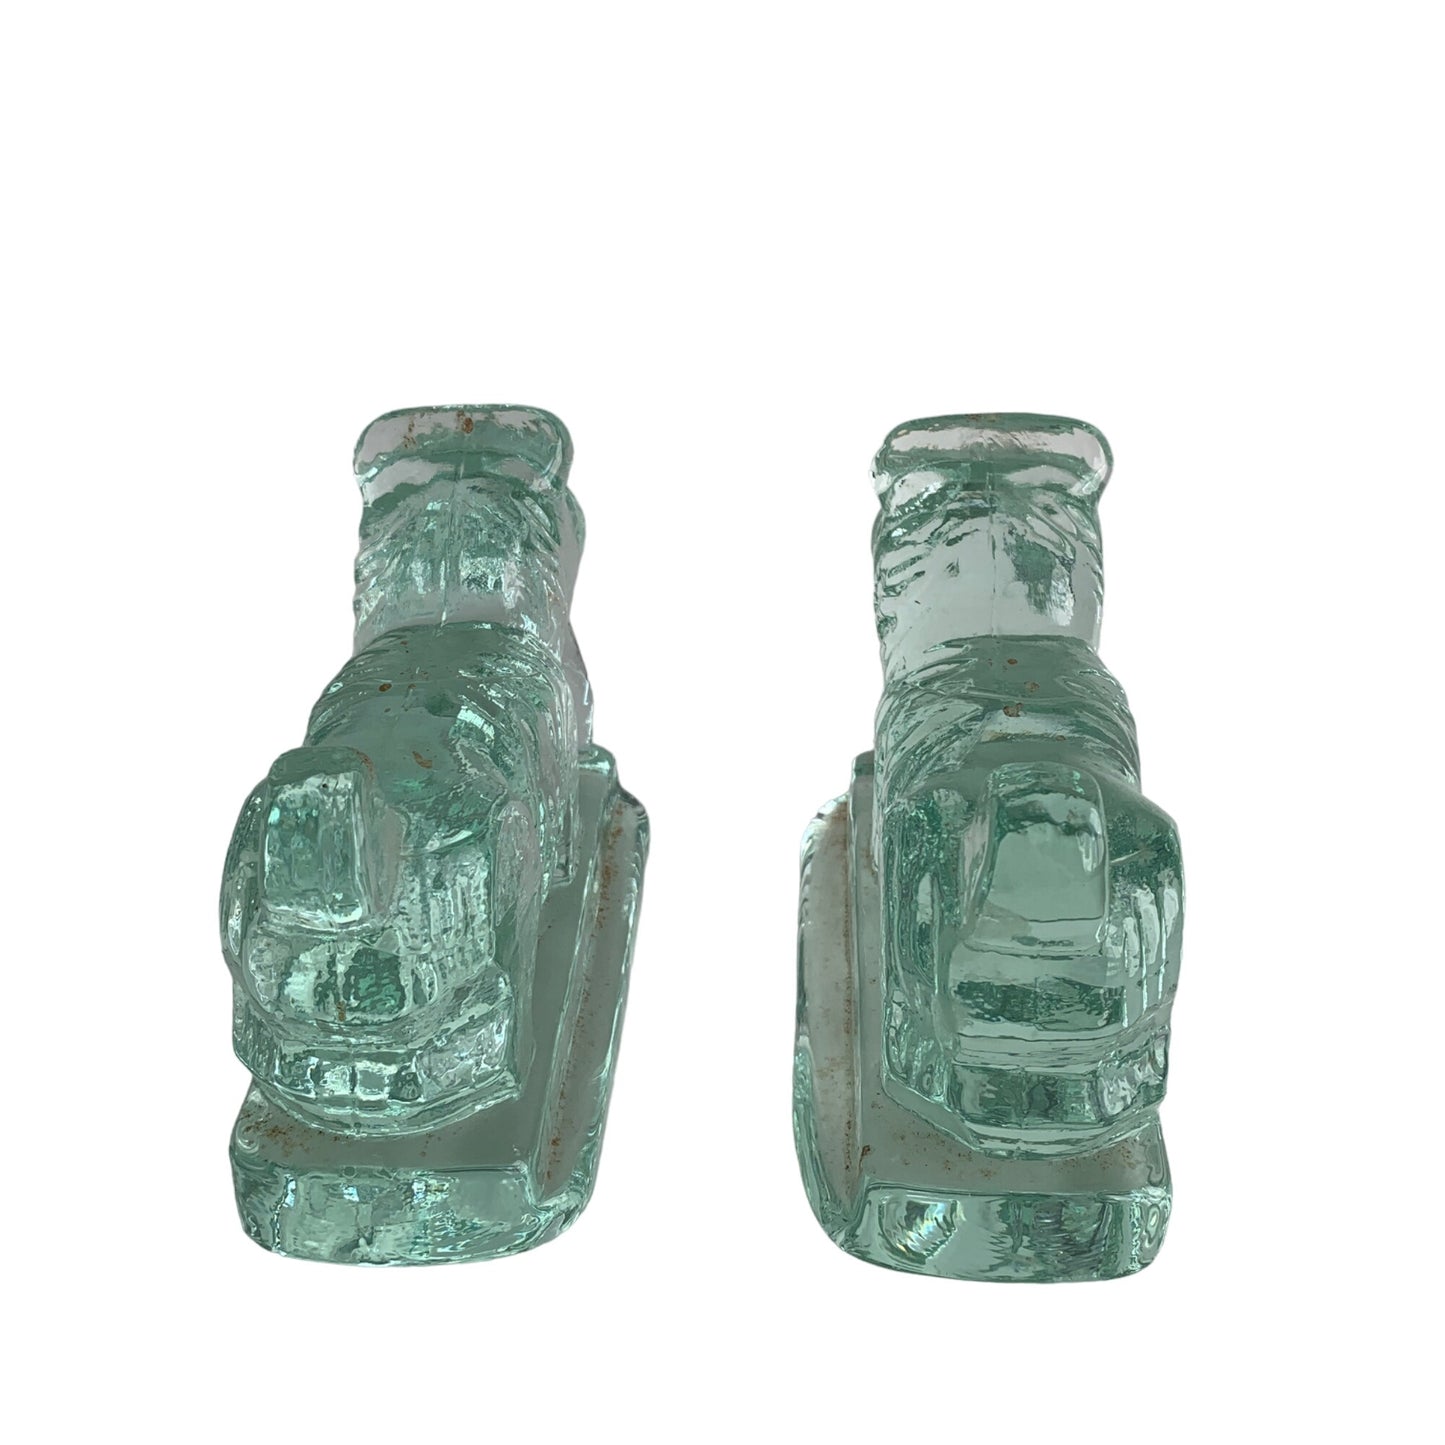 Pair Scottie Dogs Glass Heavy Bookends Set of 2 Seaglass Green